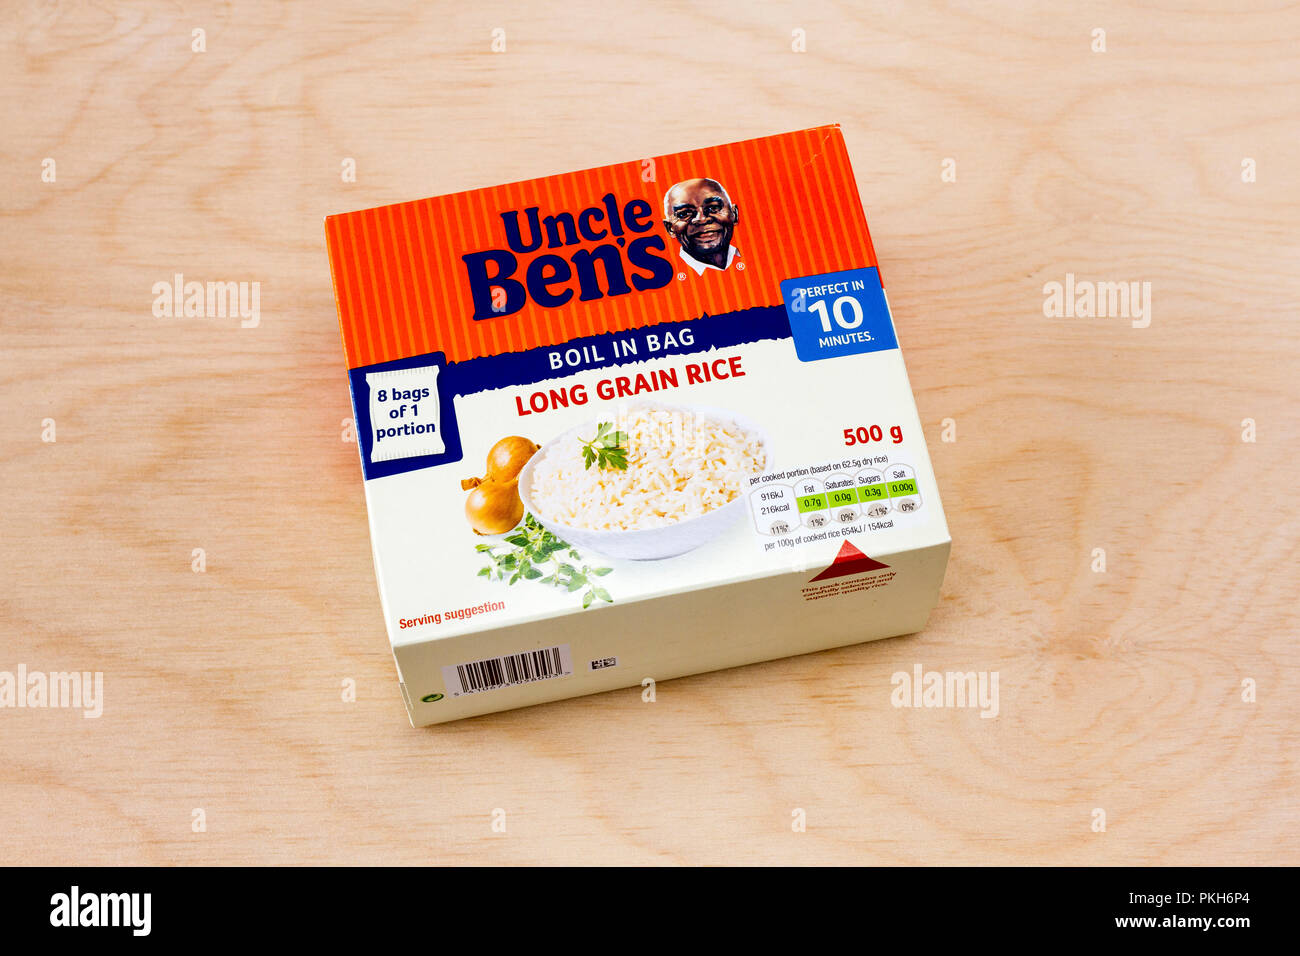 Box of Uncle Ben's boil in the bag long grain rice, on a light wood background, United Kingdom Stock Photo